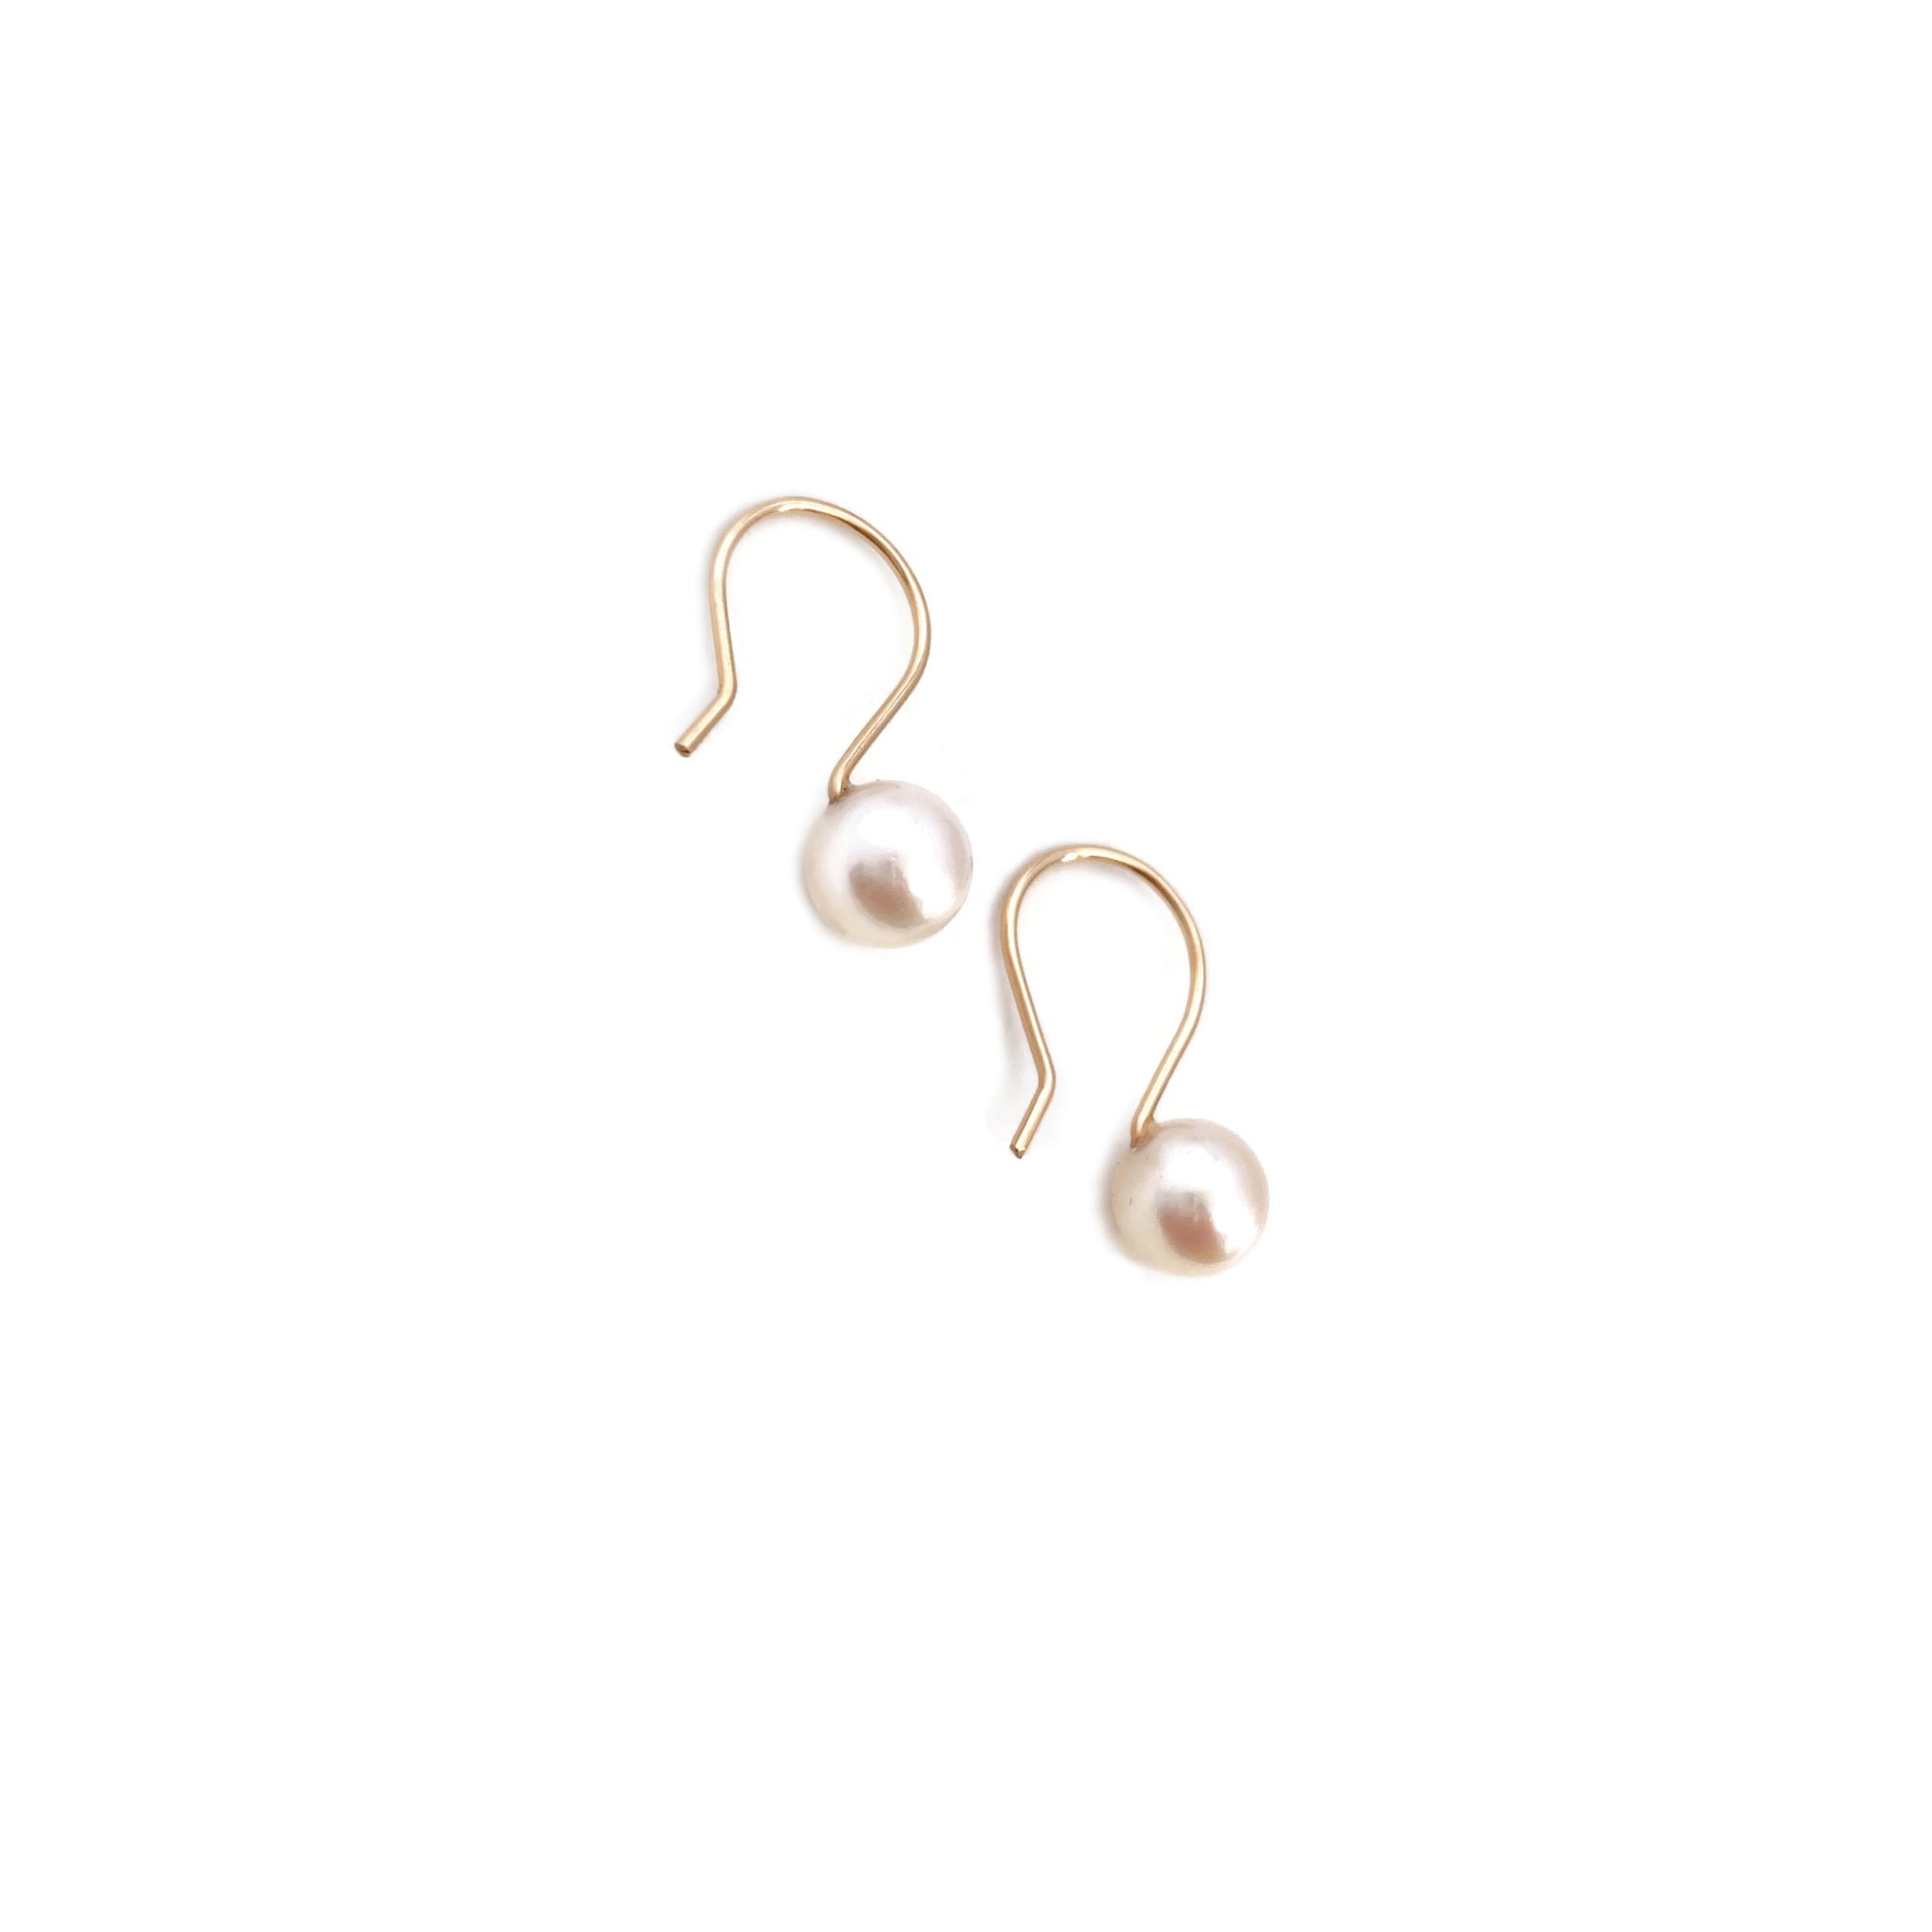 Pearl earrings are made of fresh water pearls.